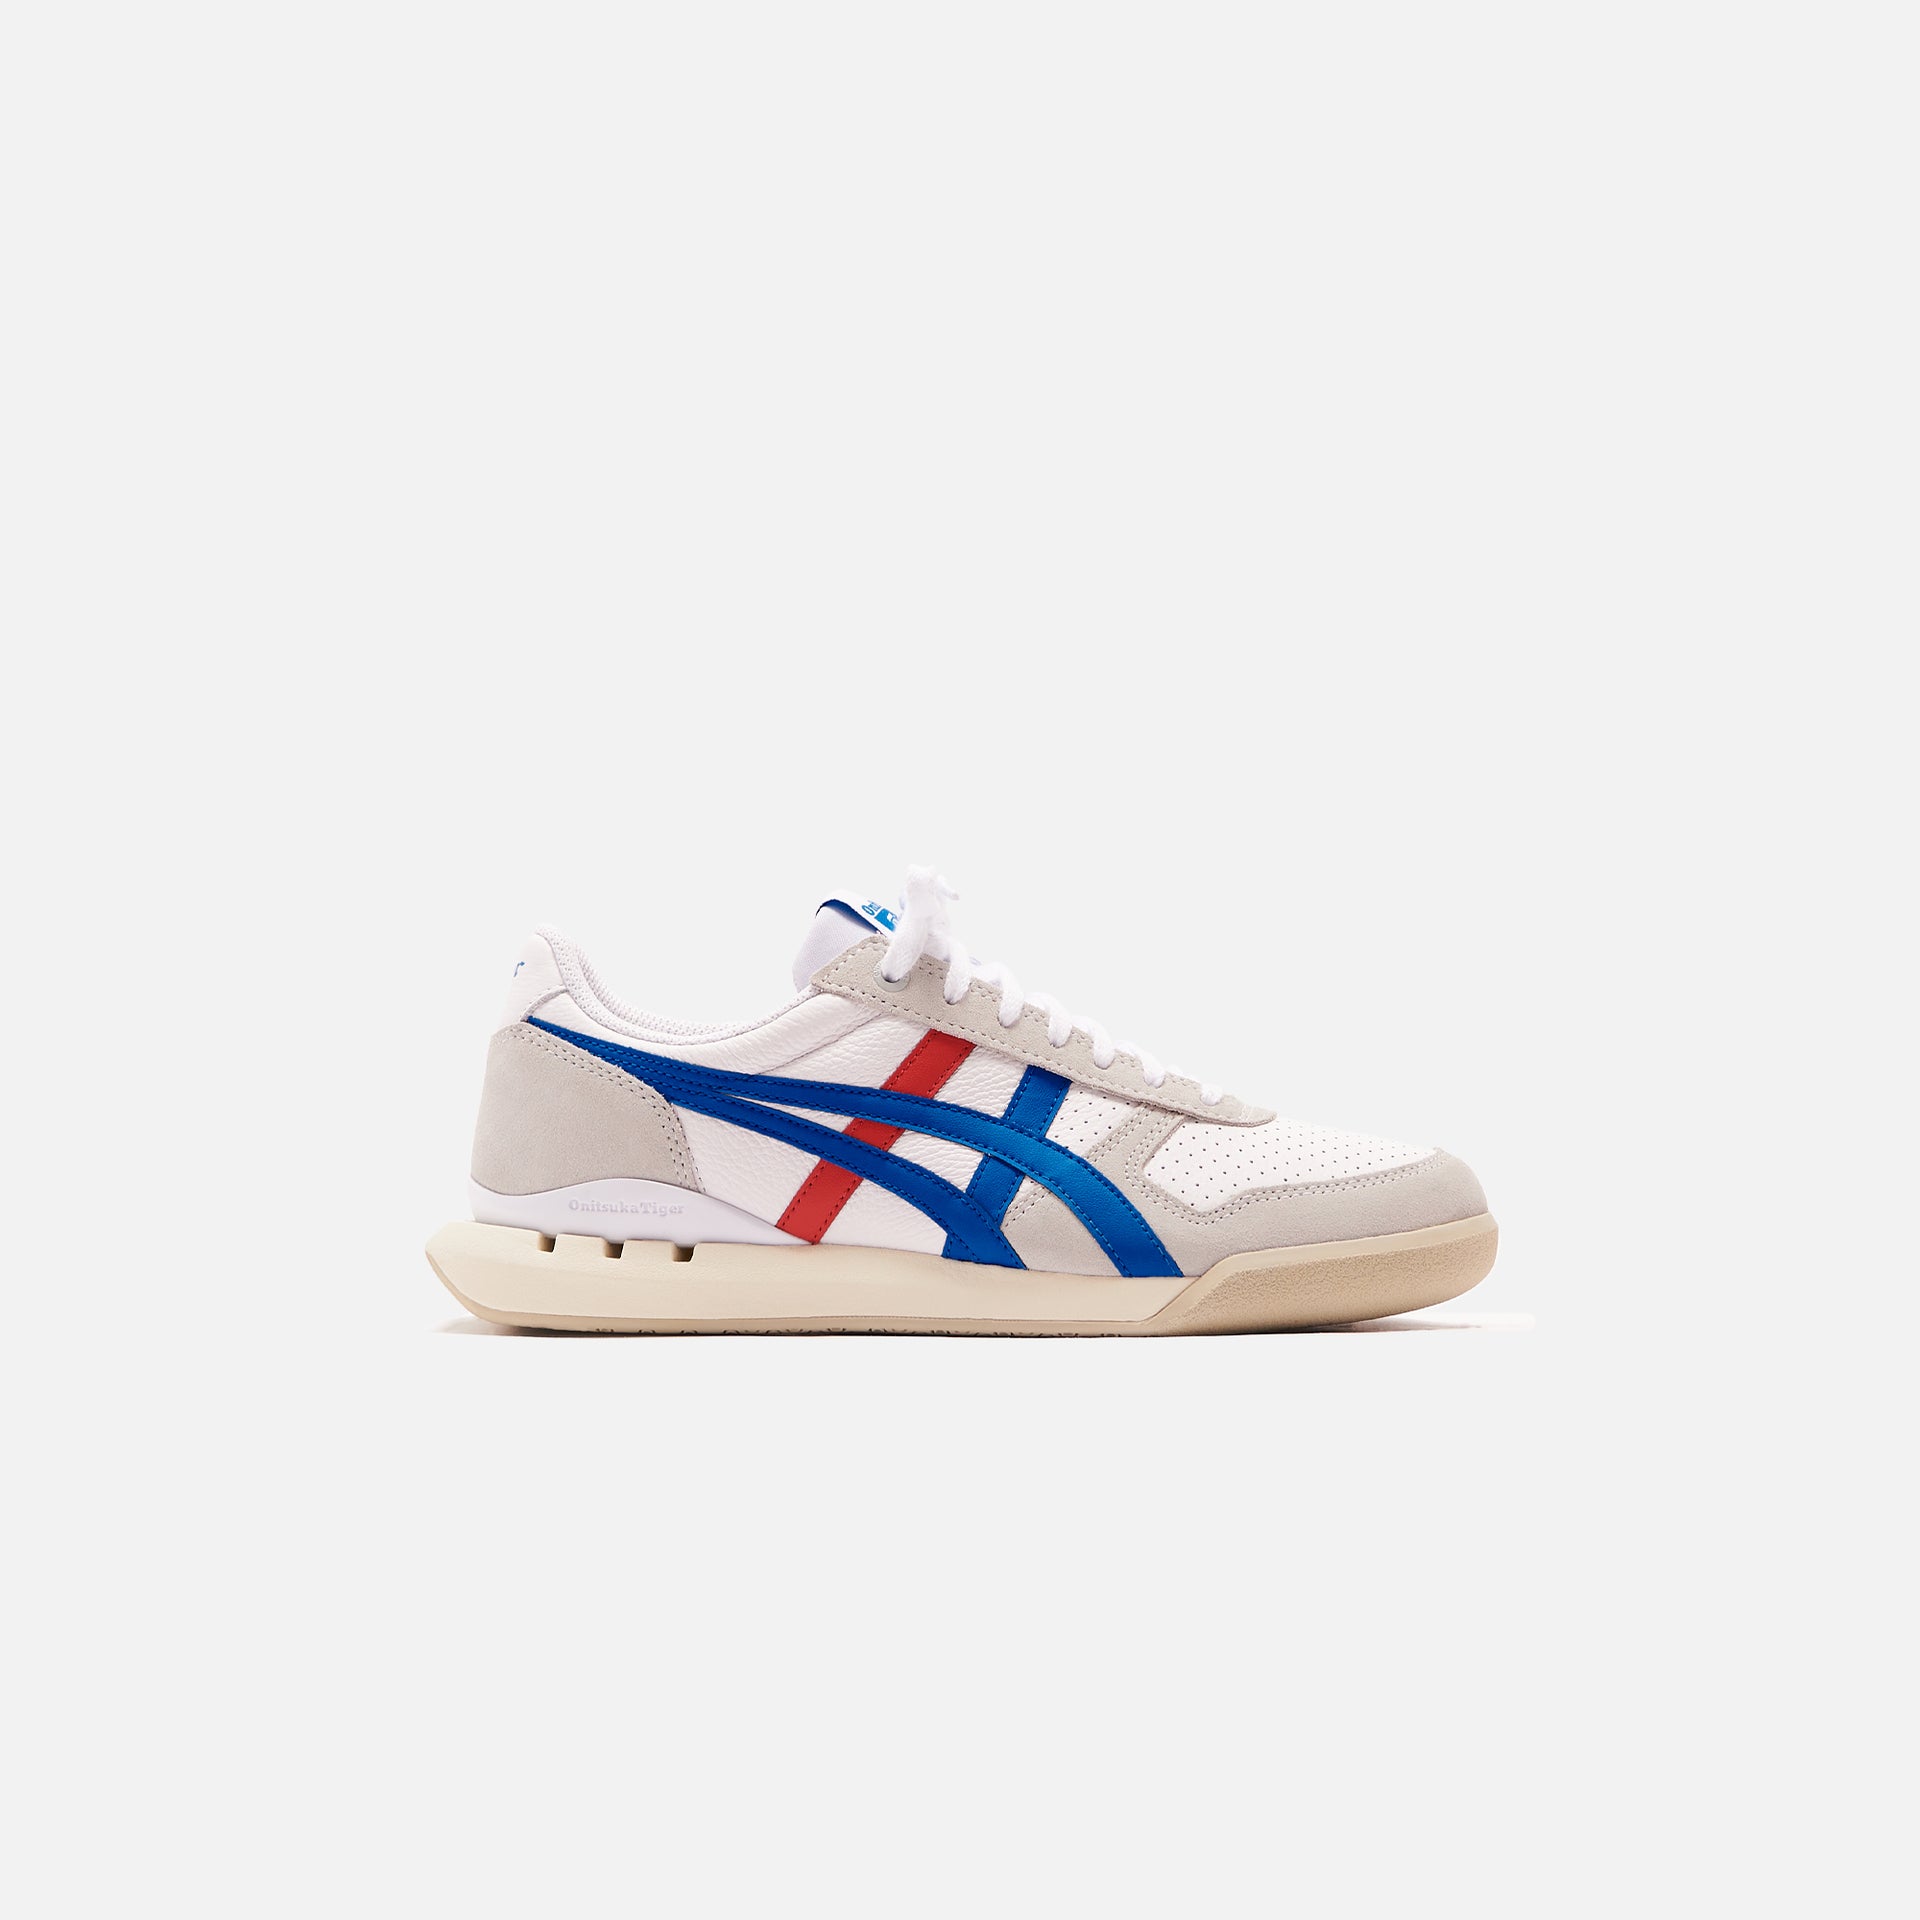 Onitsuka Tiger Ultimate 81 EX - White / Directoire Blue